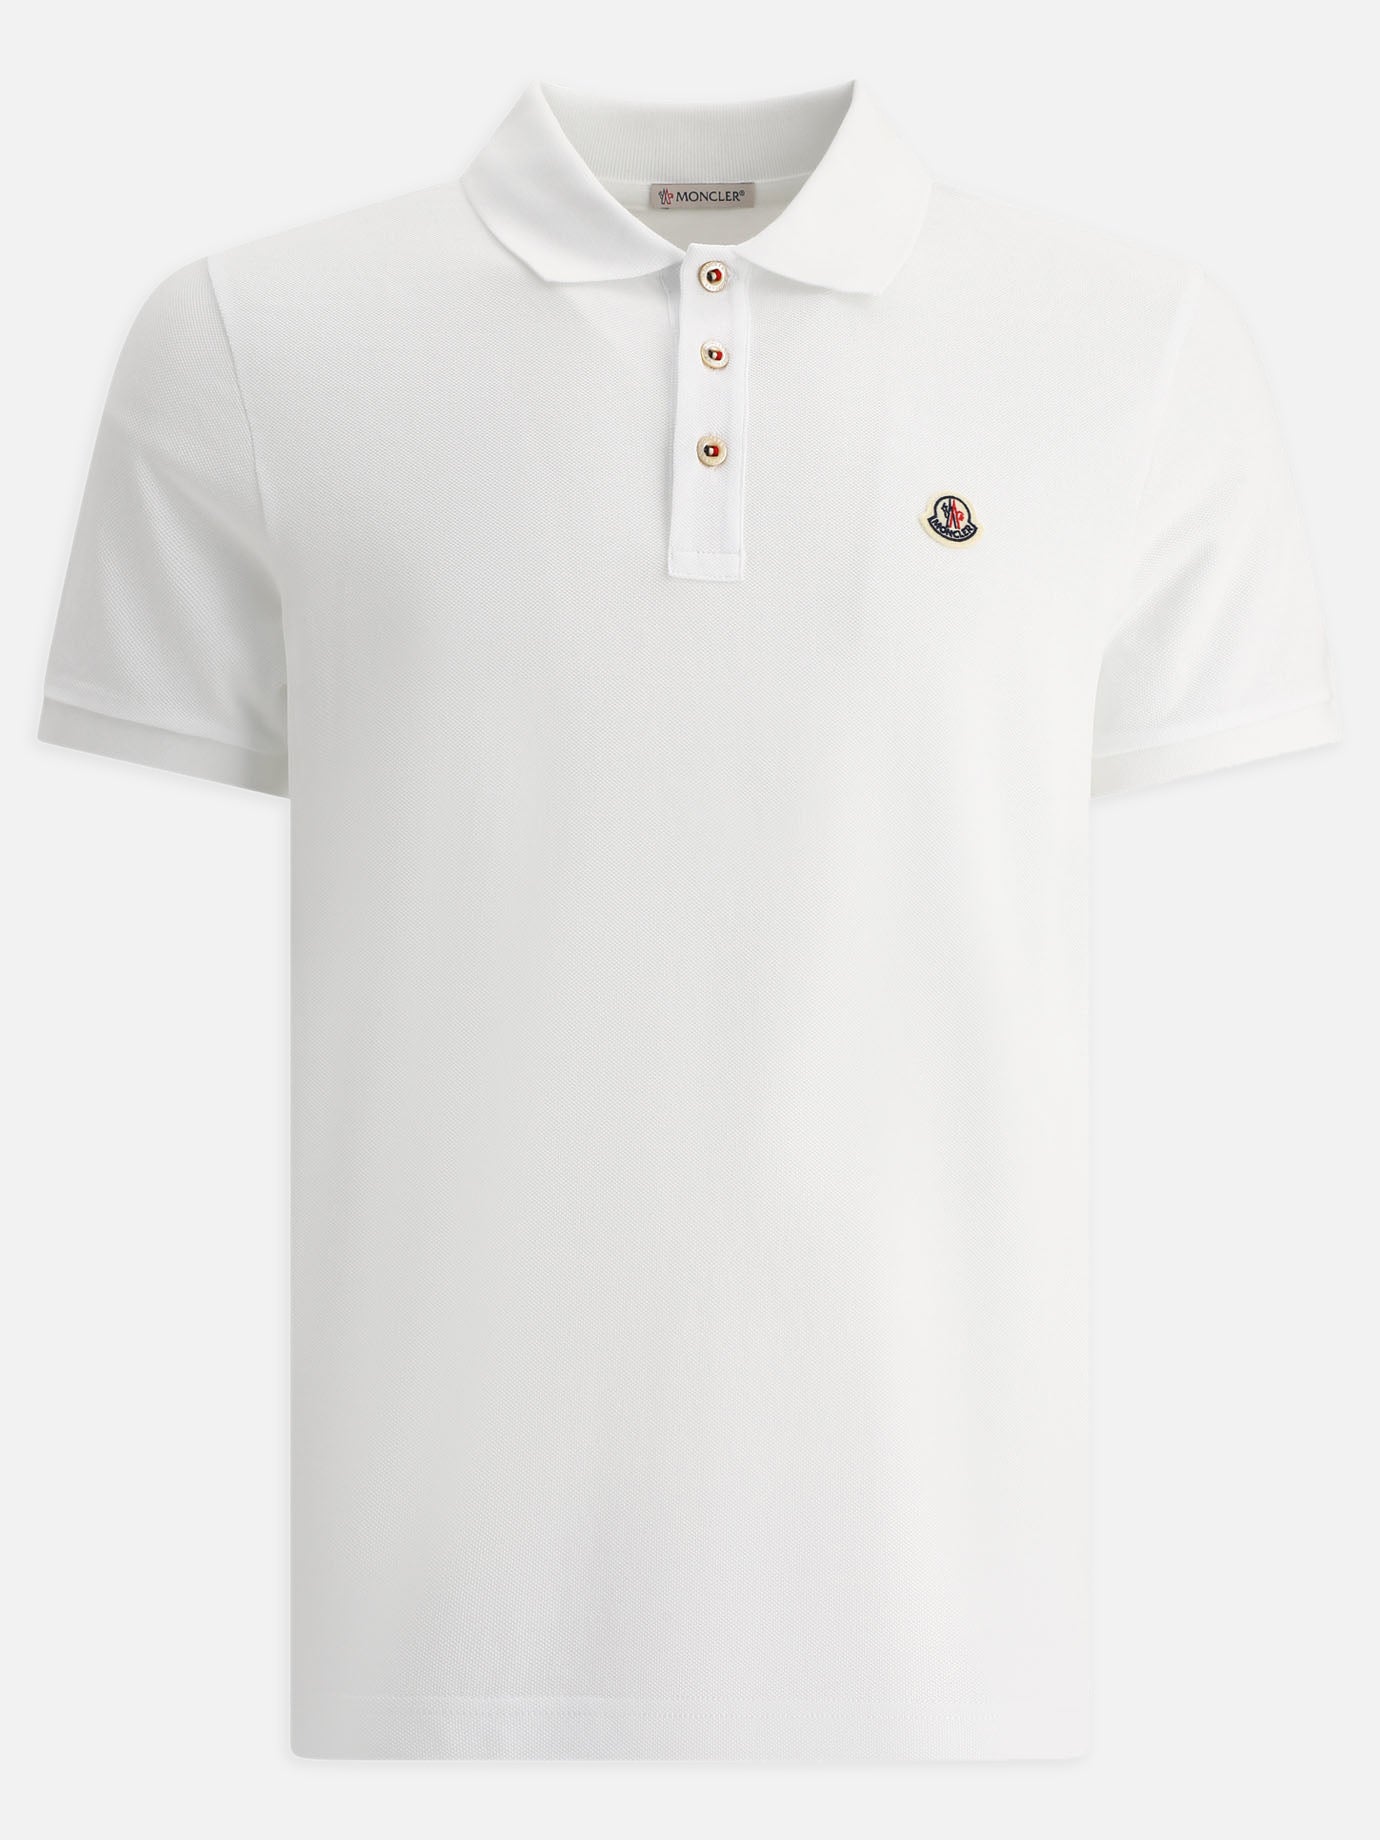 Piquet polo shirt with patch